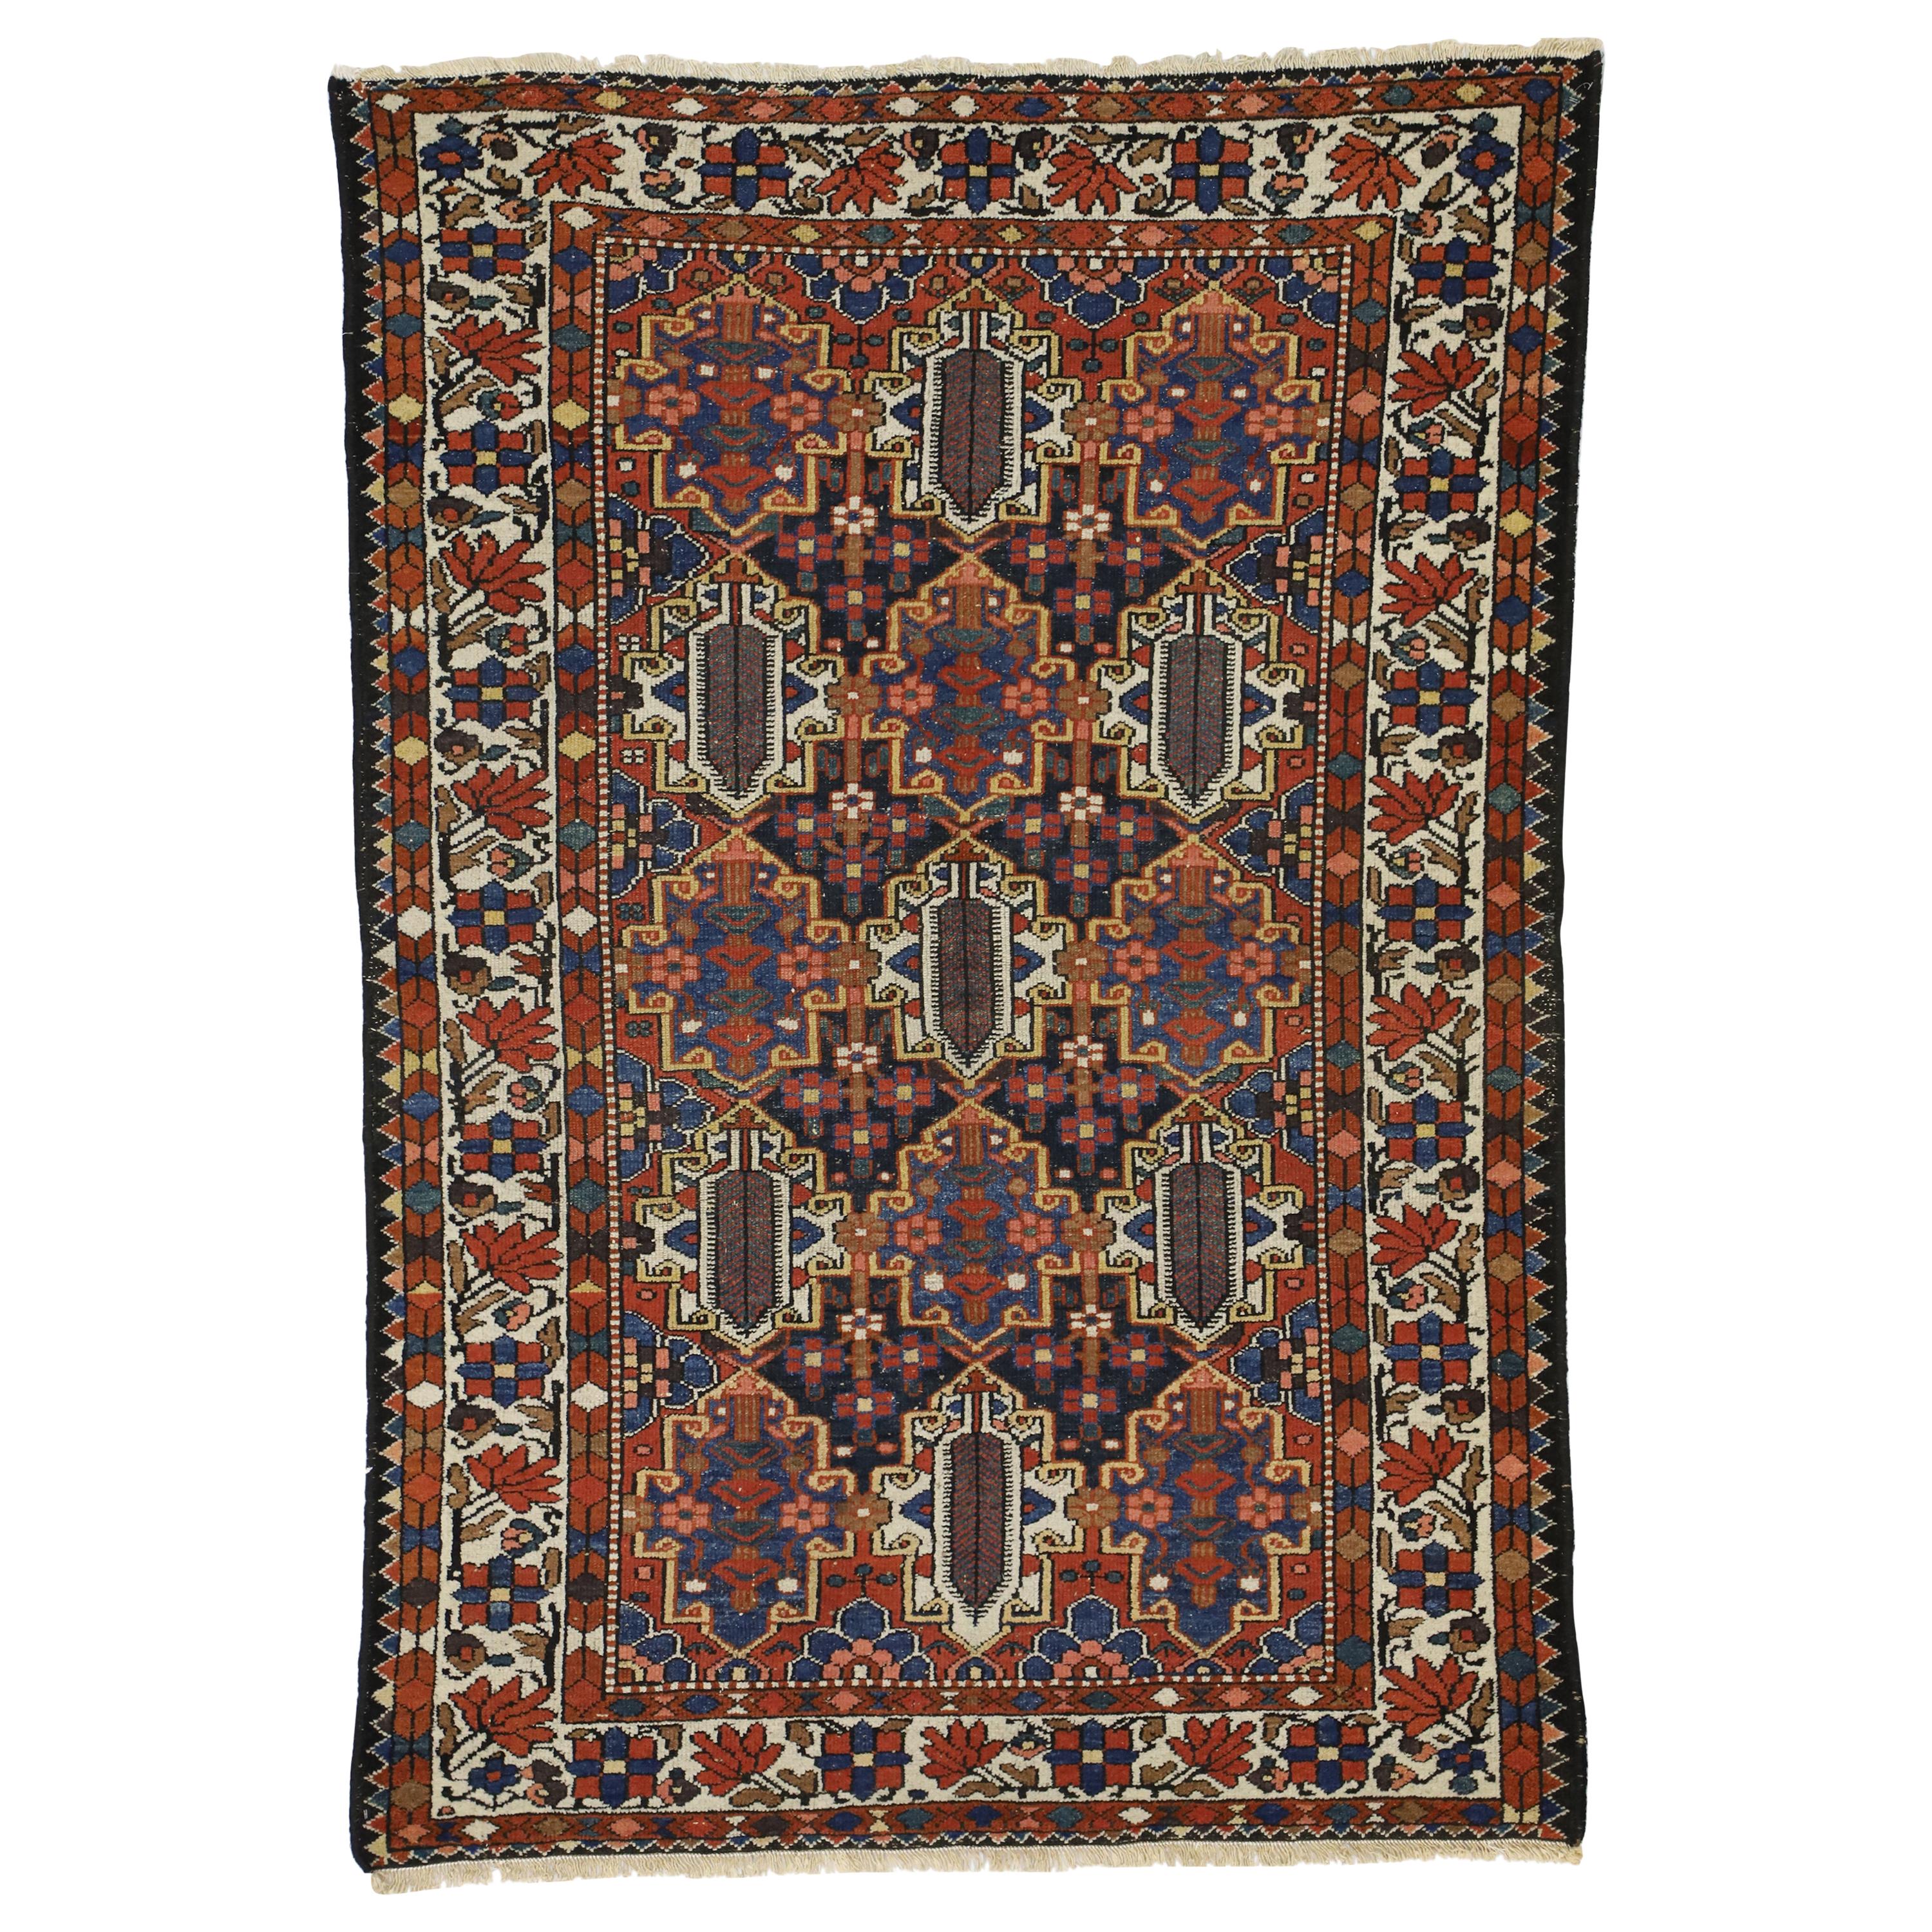 Antique Persian Bakhtiari Rug with Federal American Colonial Style